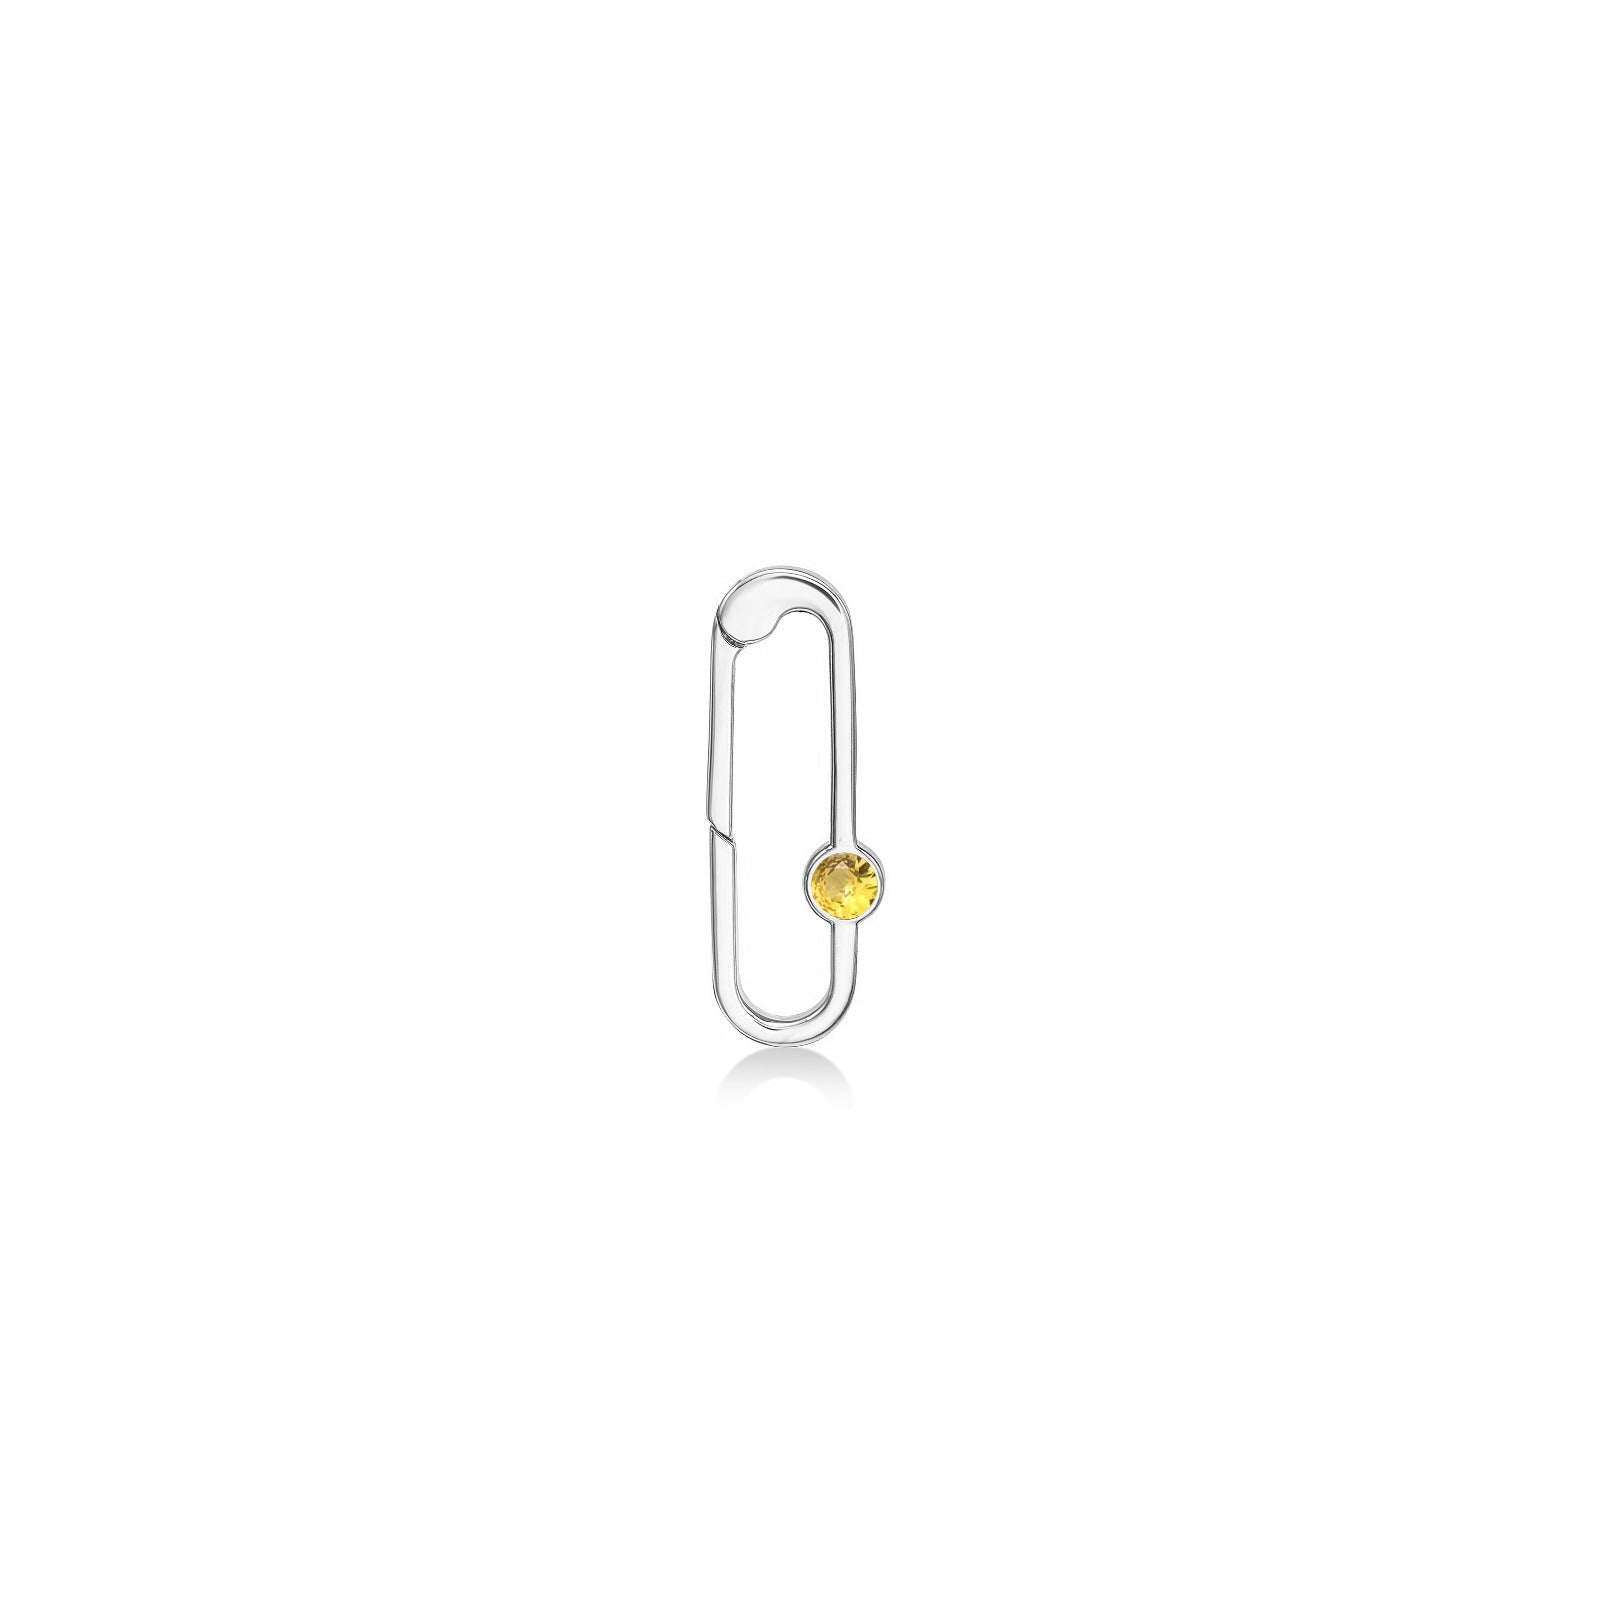 14k white gold paperclip charm lock with yellow topaz